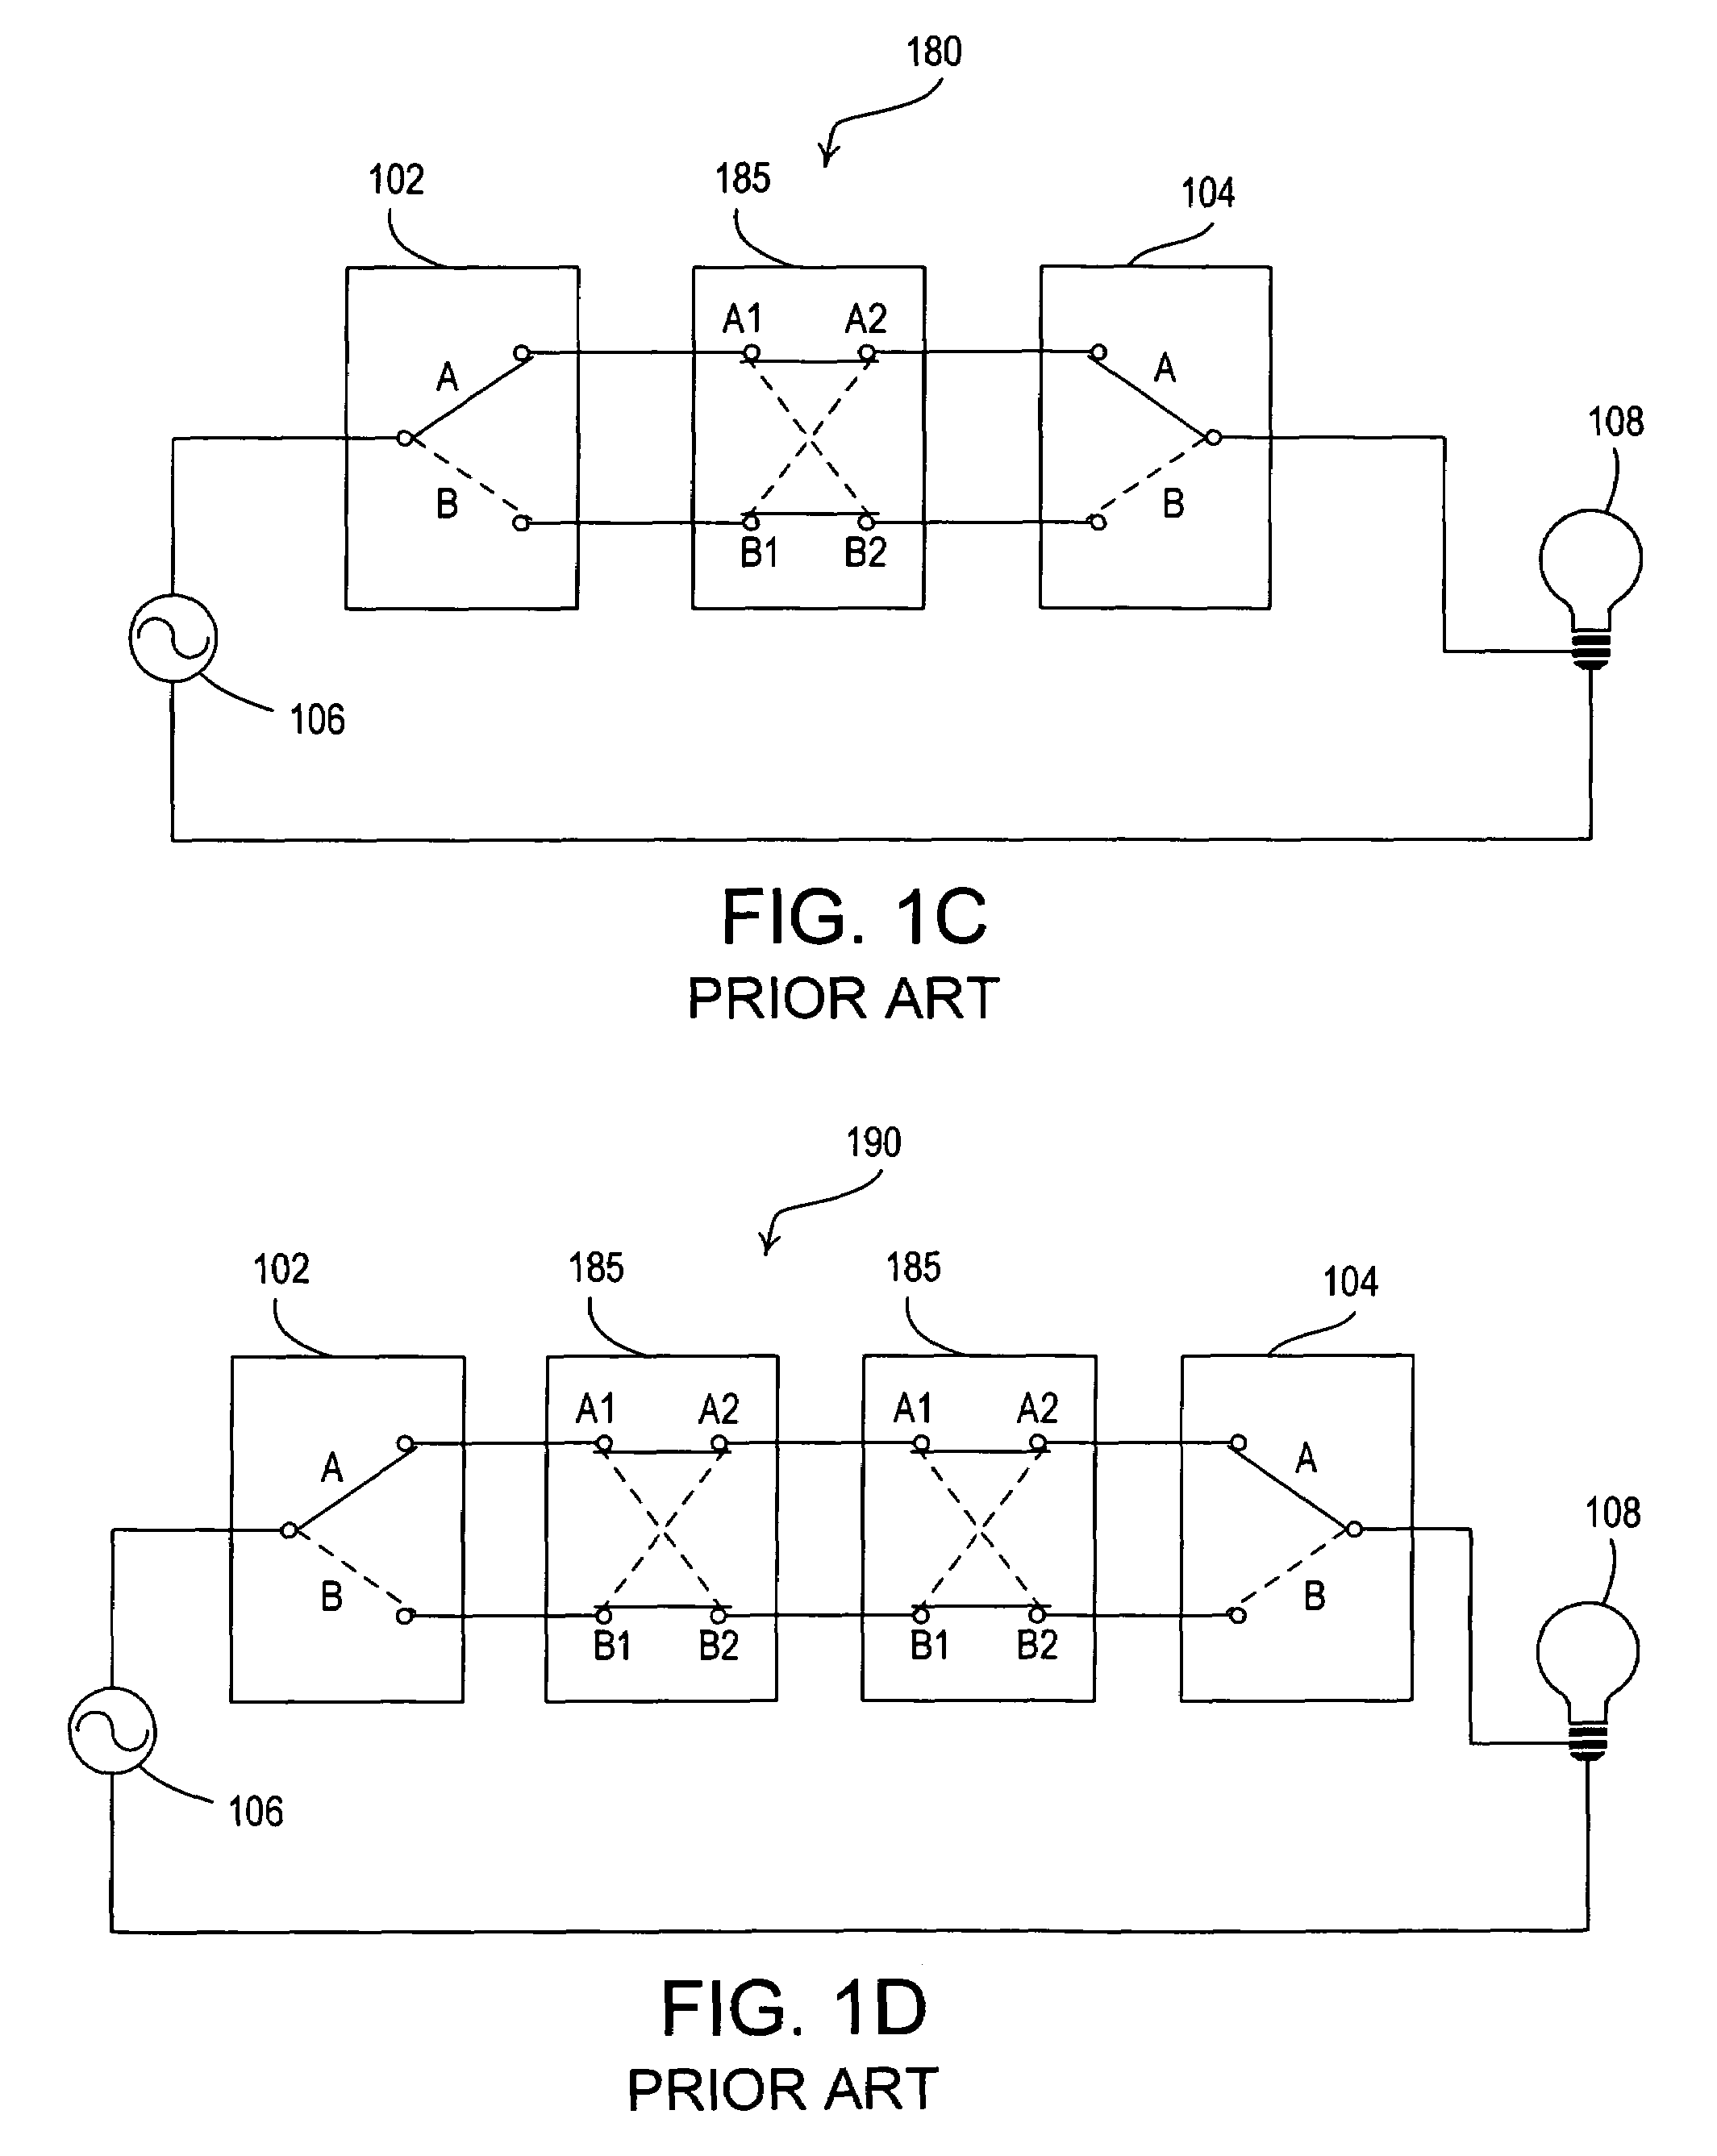 Dimmer switch for use with lighting circuits having three-way switches